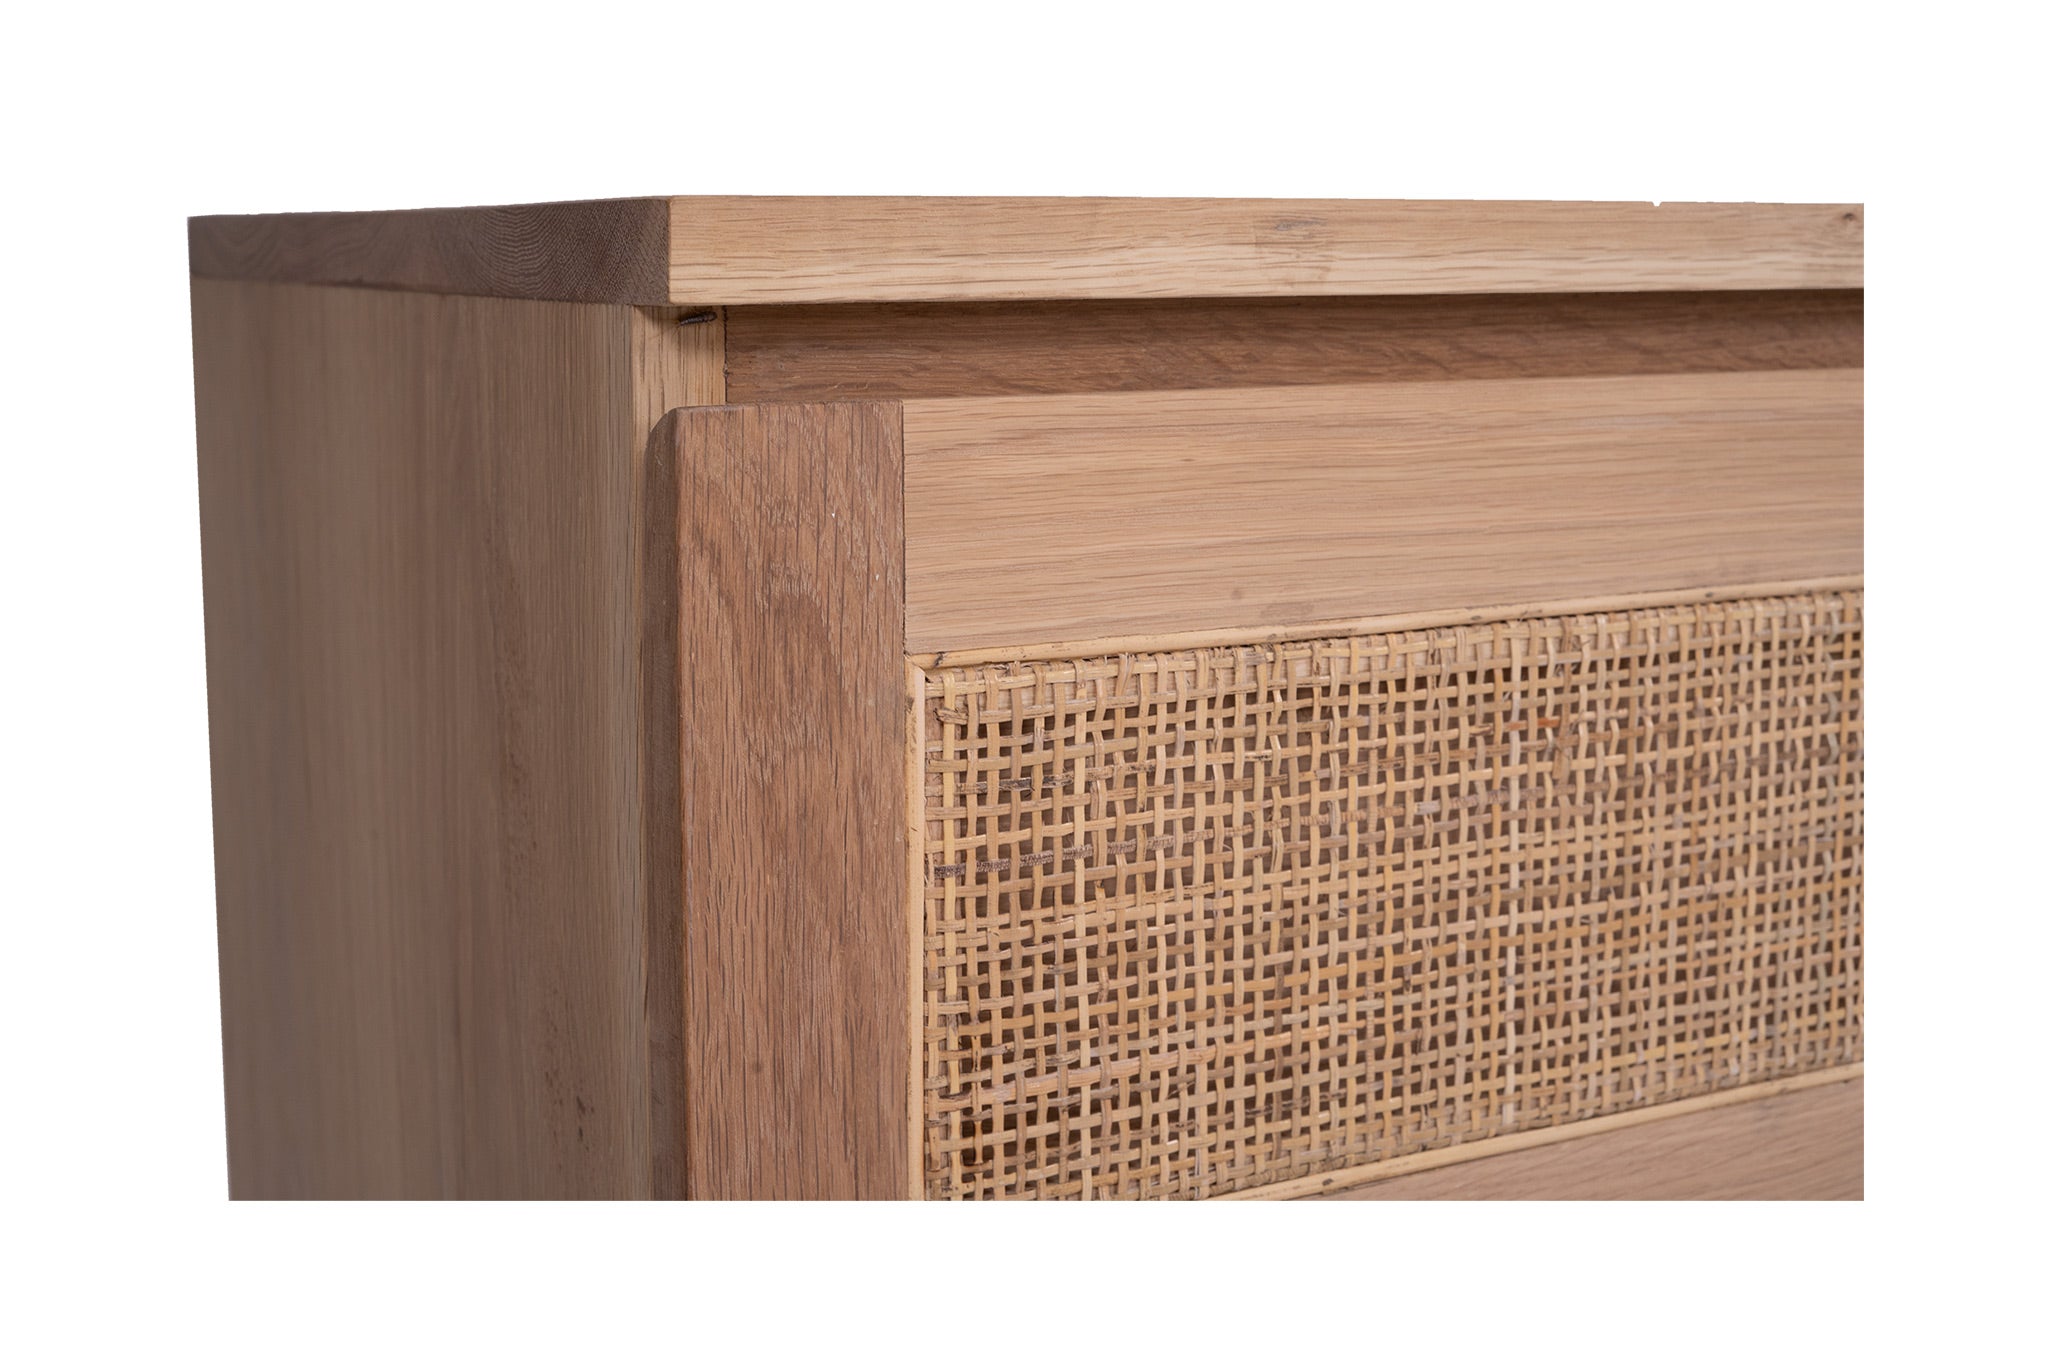 Dover American Oak Chest Of Drawers – 4 Drawers